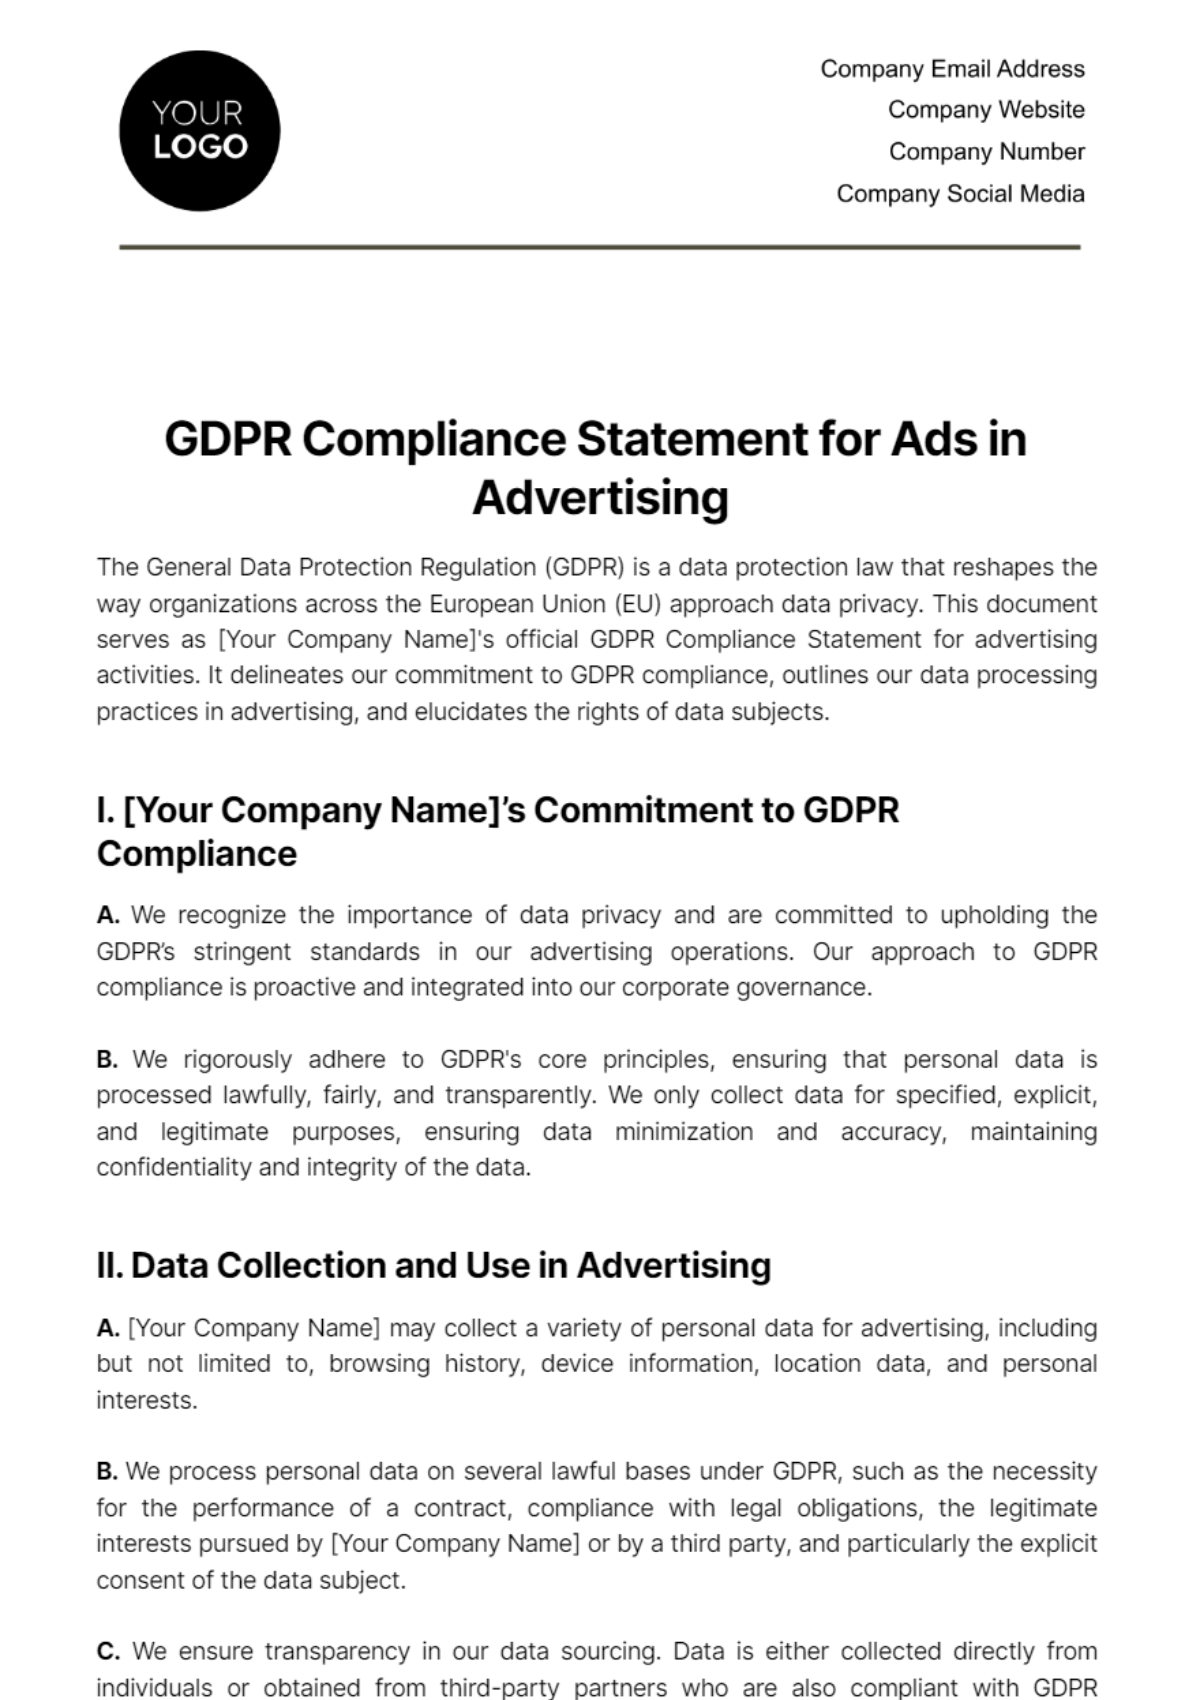 Free GDPR Compliance Statement for Ads in Advertising Template